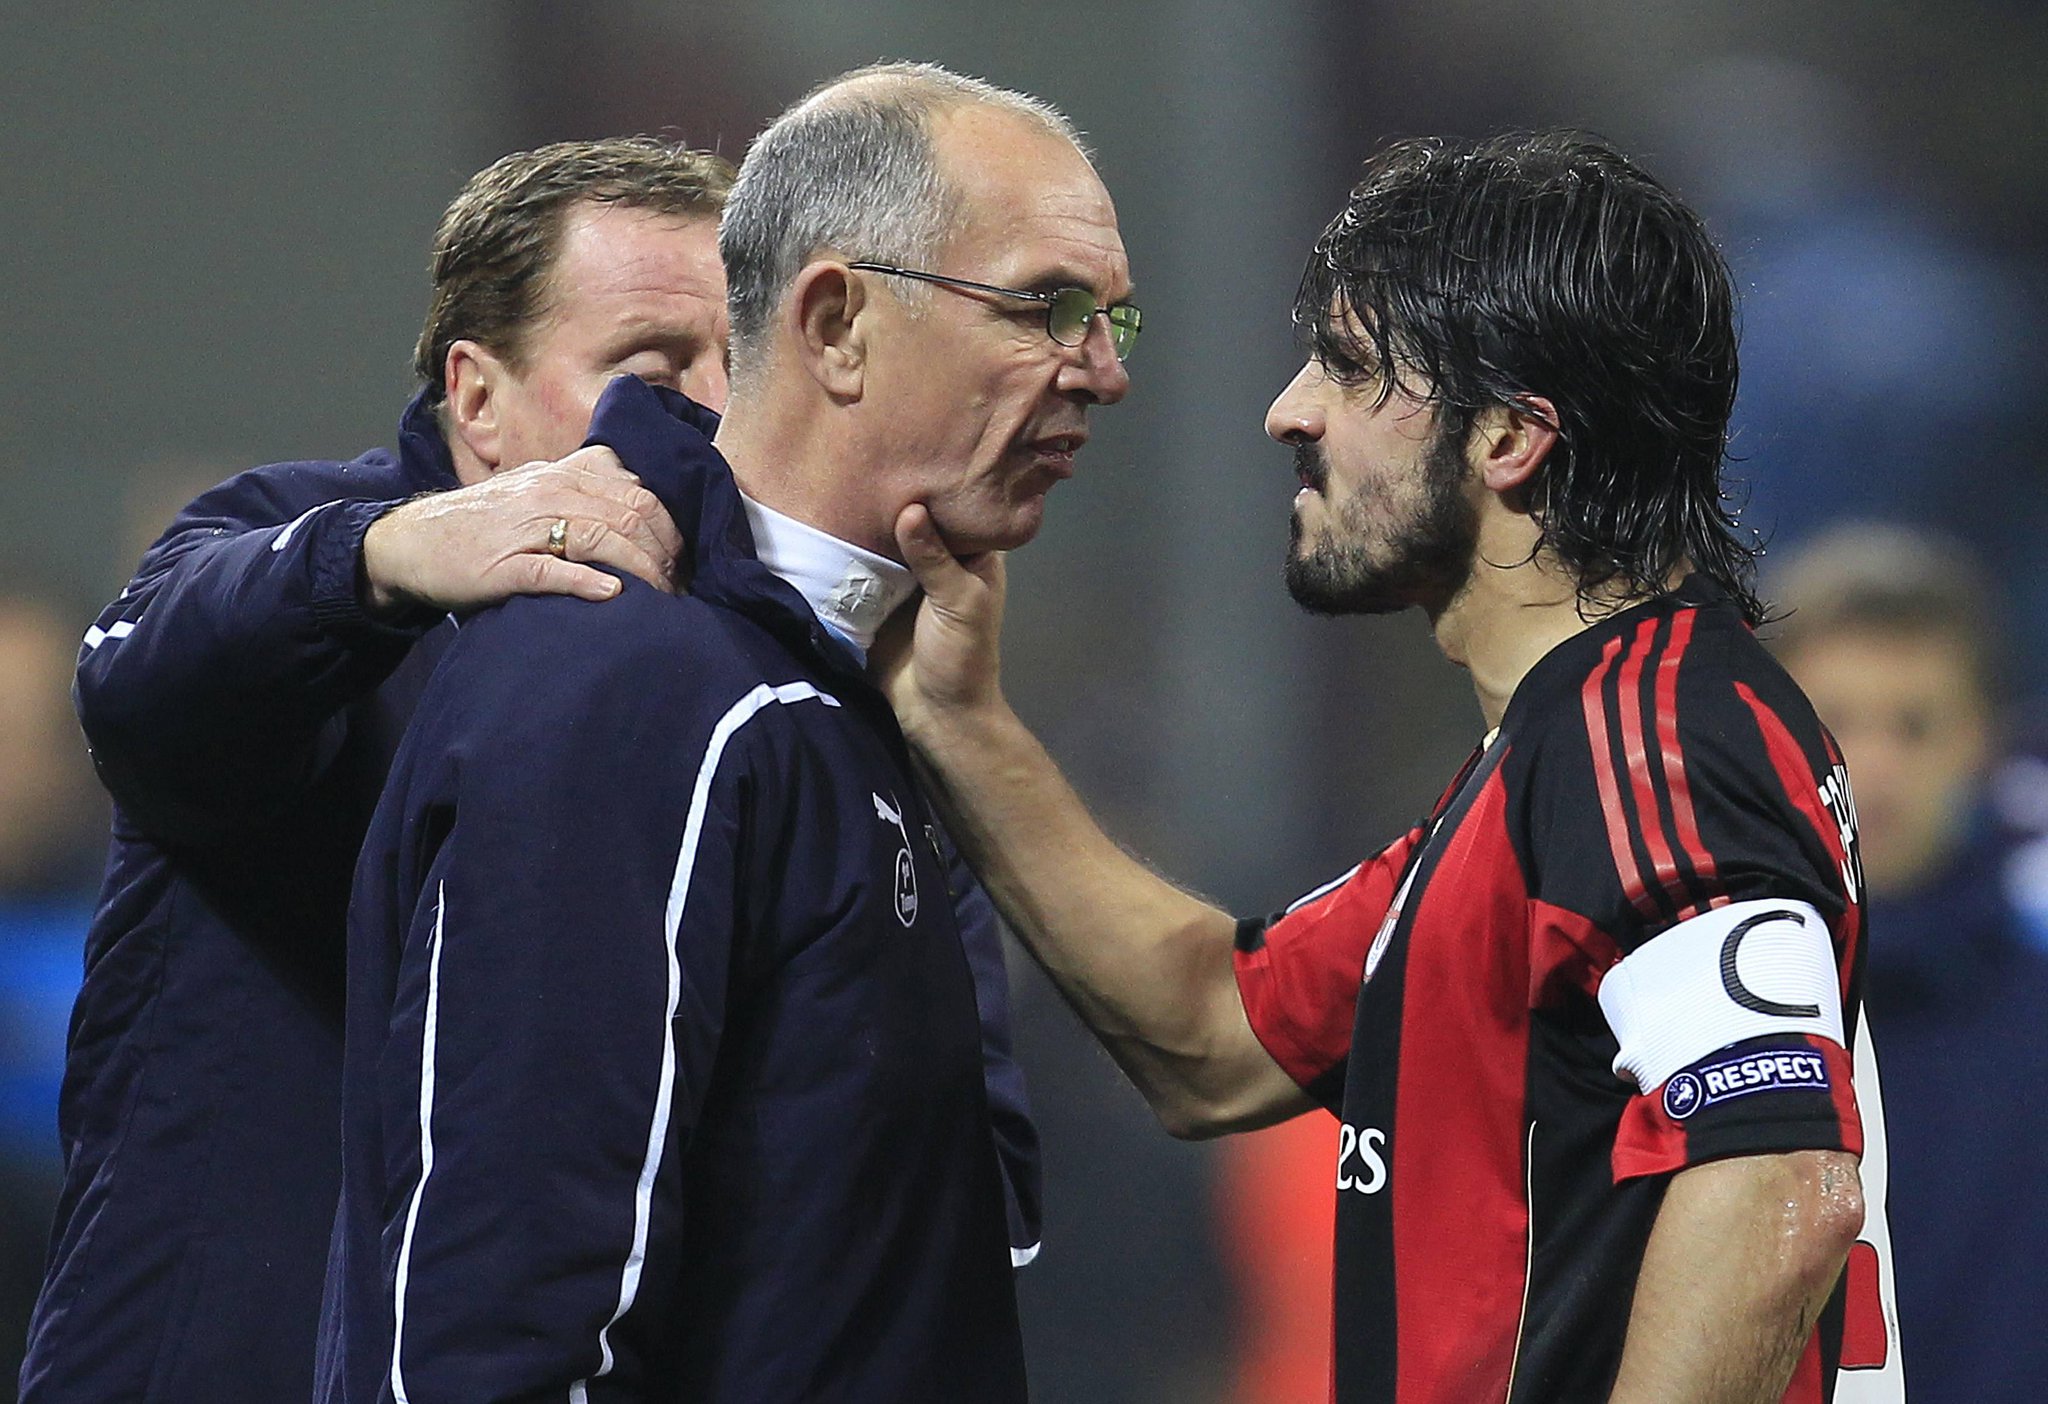 Happy 37th birthday to Gennaro Gattuso today. He won the Champions League (2), Serie A (2) and the 2006 World Cup. 